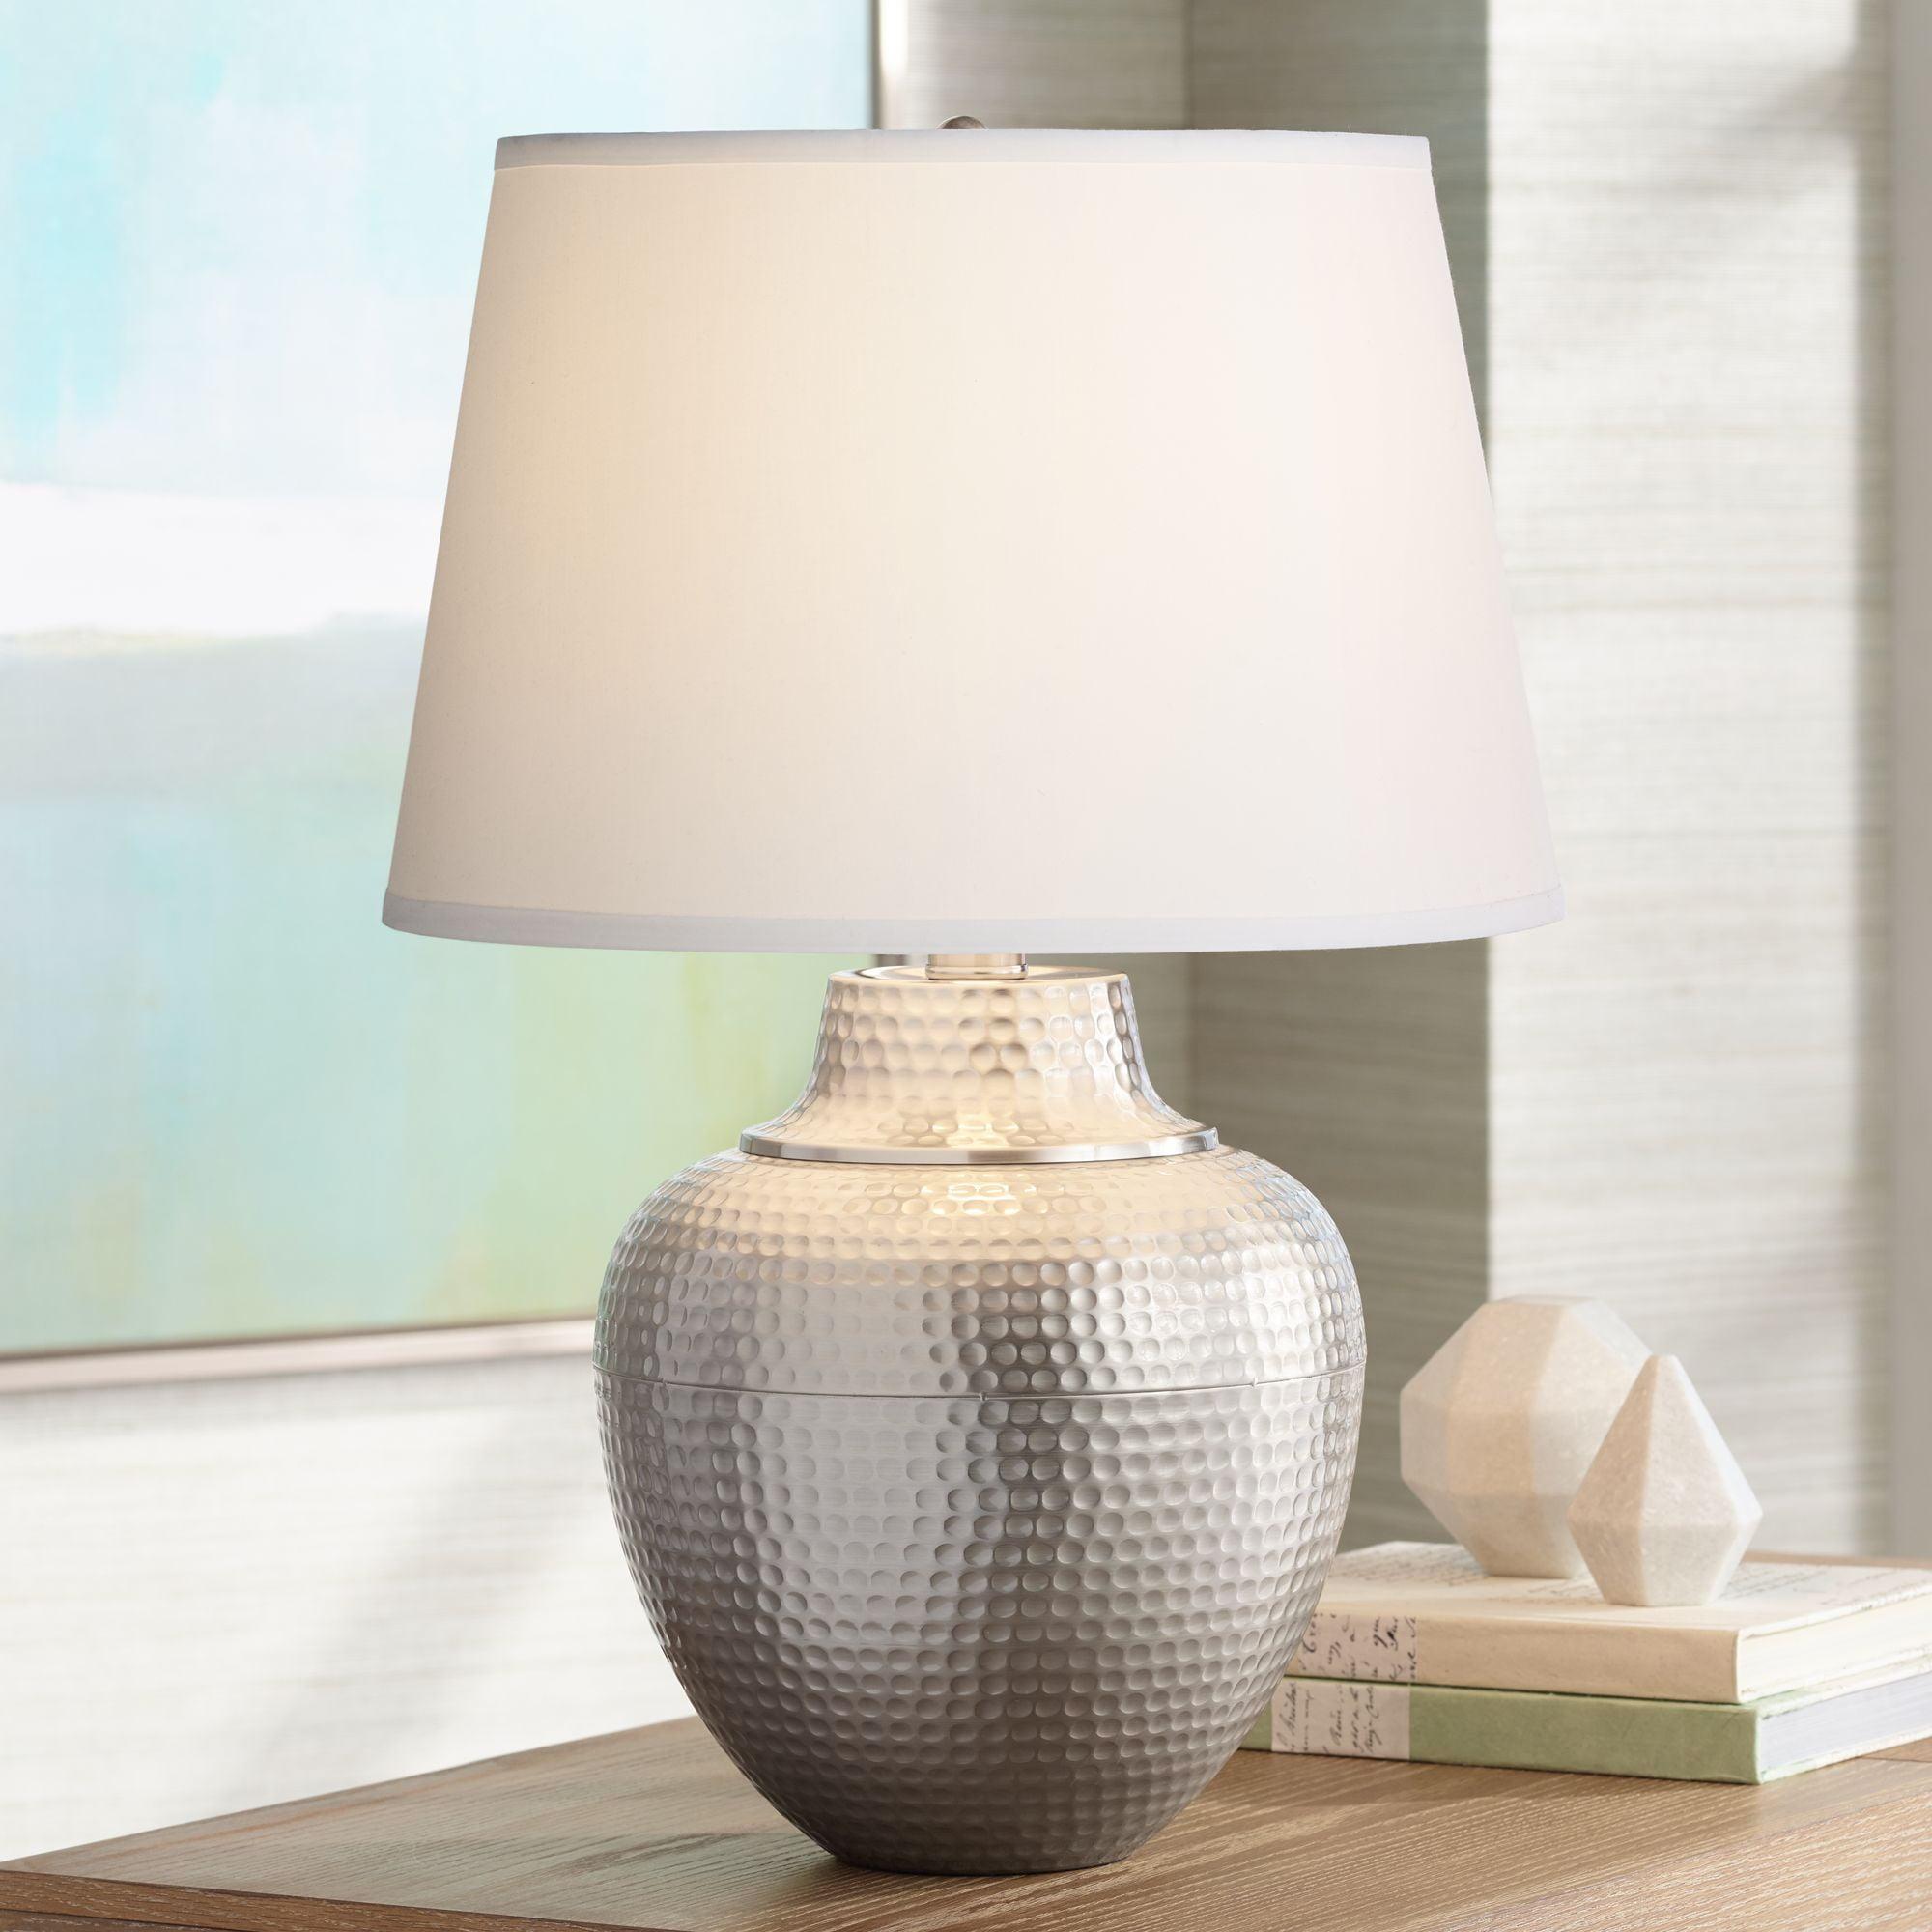 Brighton 27'' Brushed Nickel Hammered Metal Table Lamp with White Drum Shade